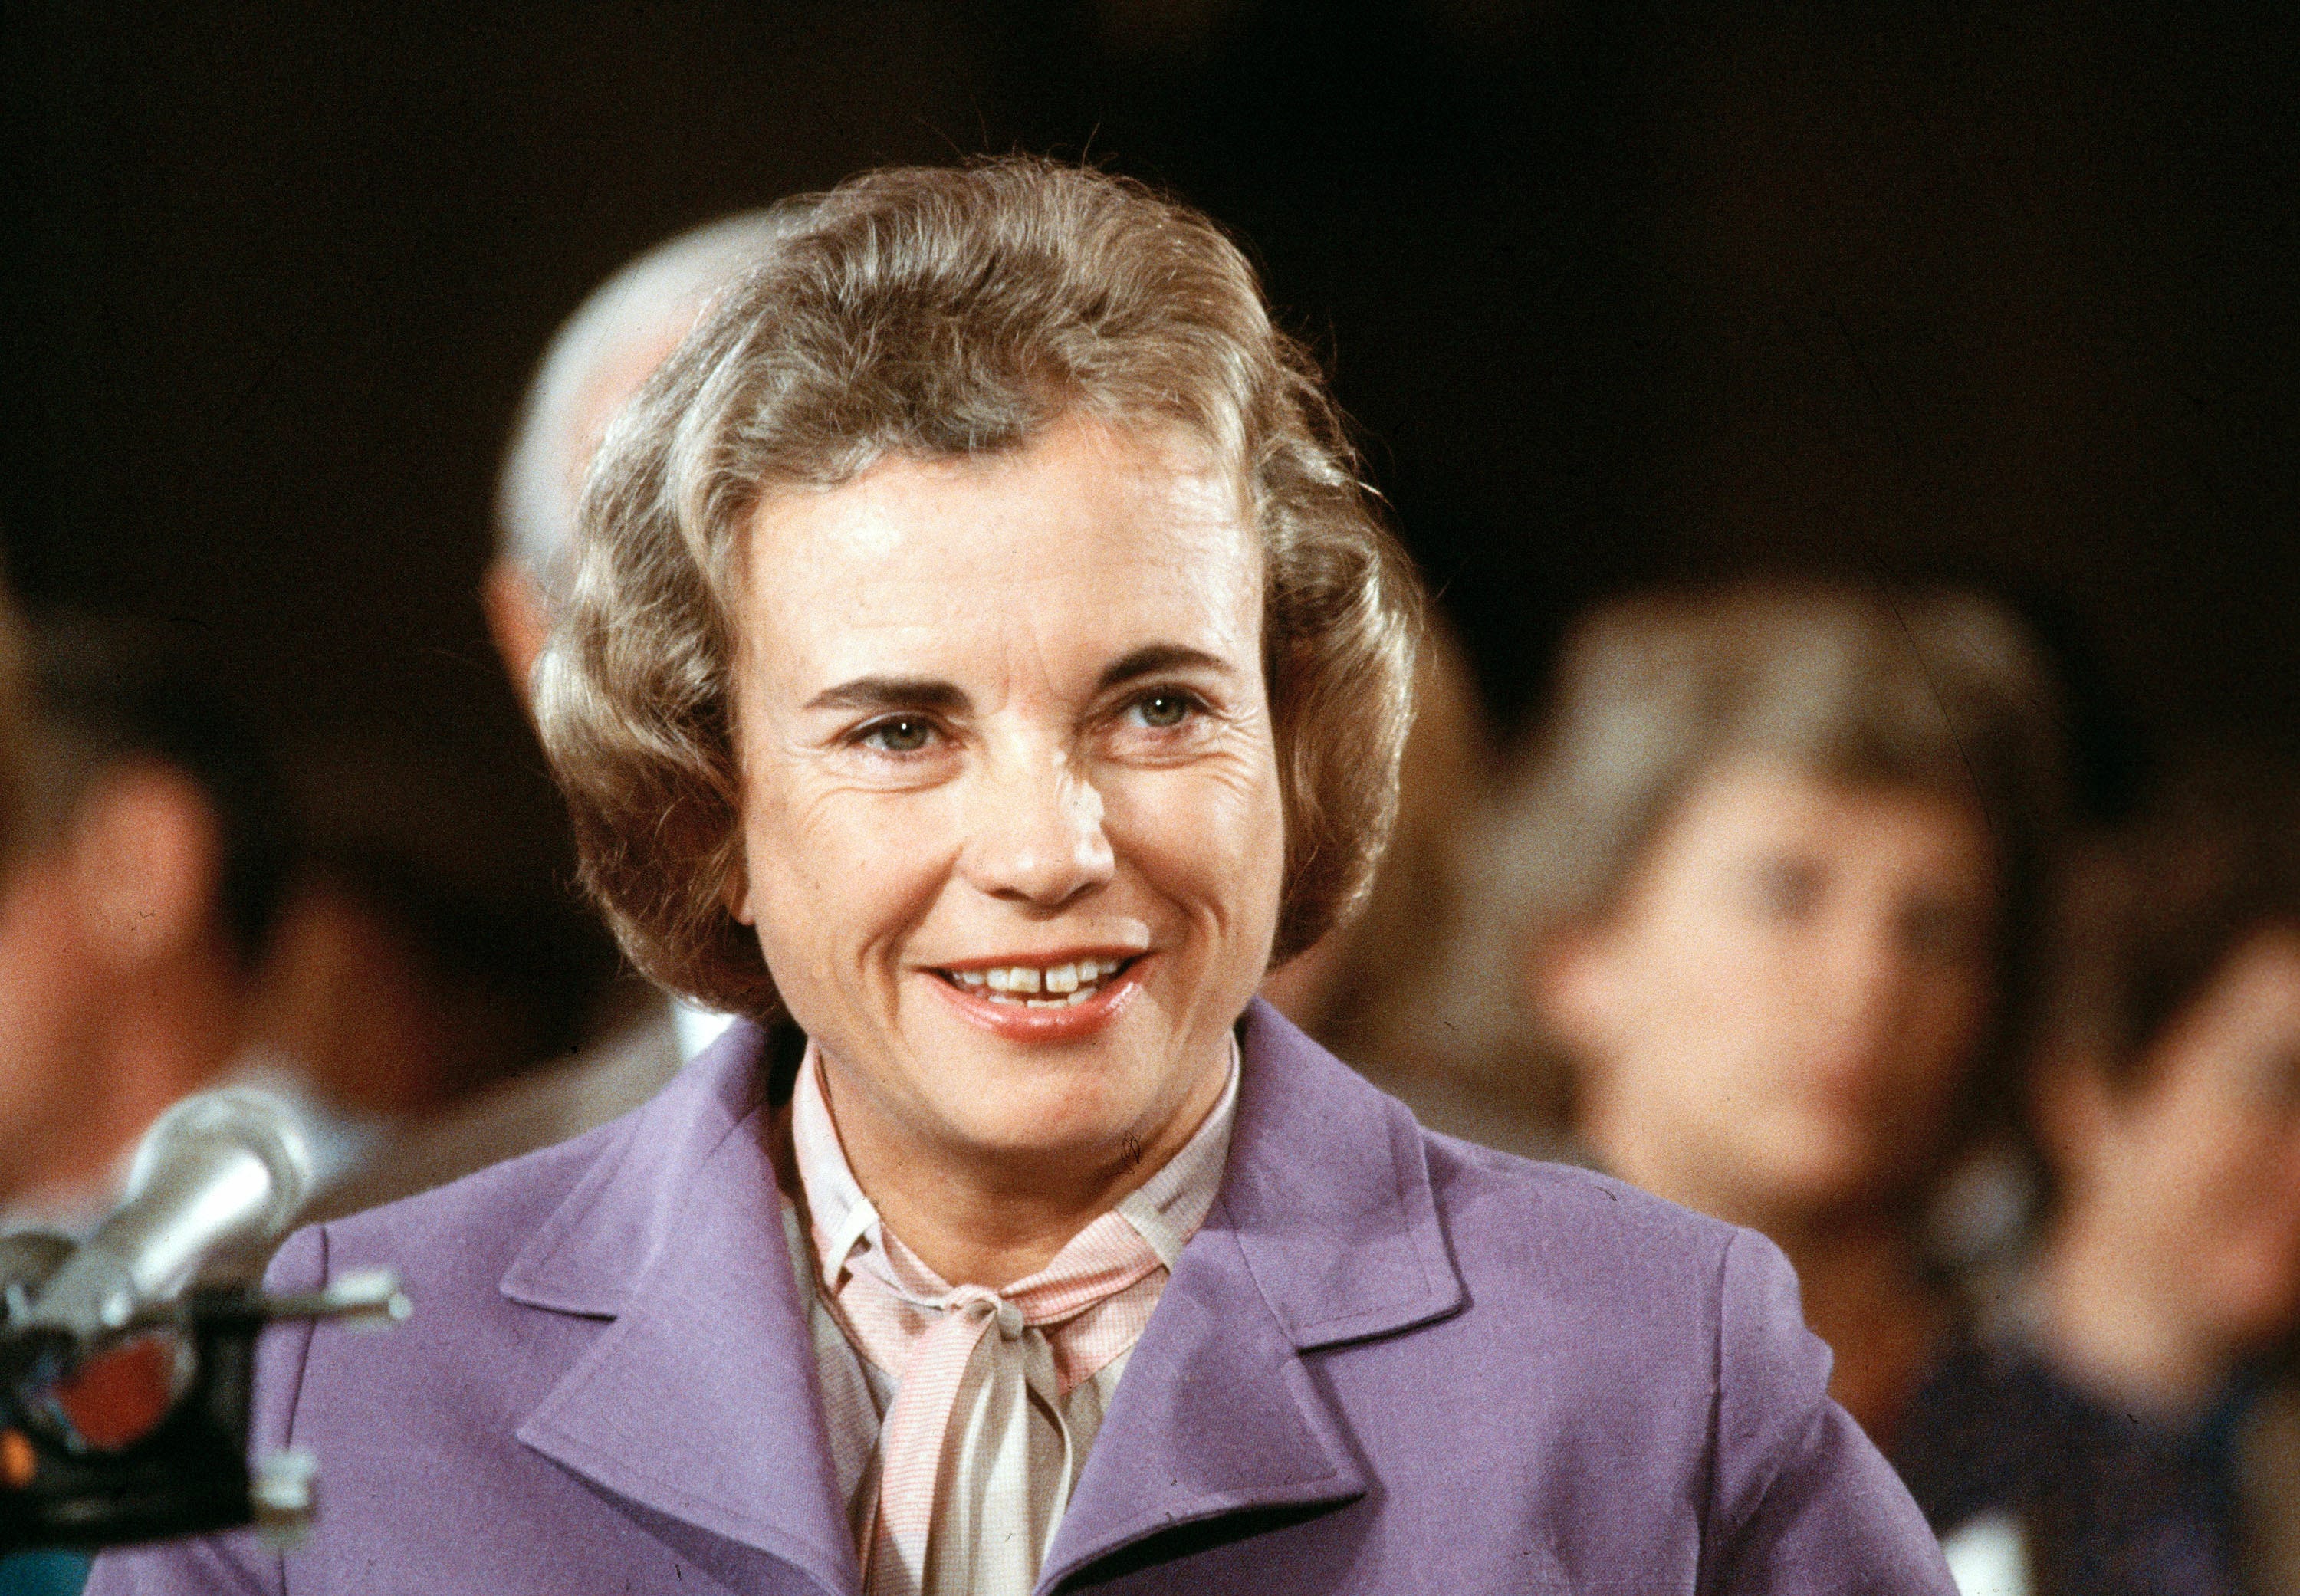 Supreme Court nominee Sandra Day O'Connor smiles during her confirmation hearing before the Senate Judiciary Committee, Sept. 9, 1981.  (AP Photo/Ron Edmonds)